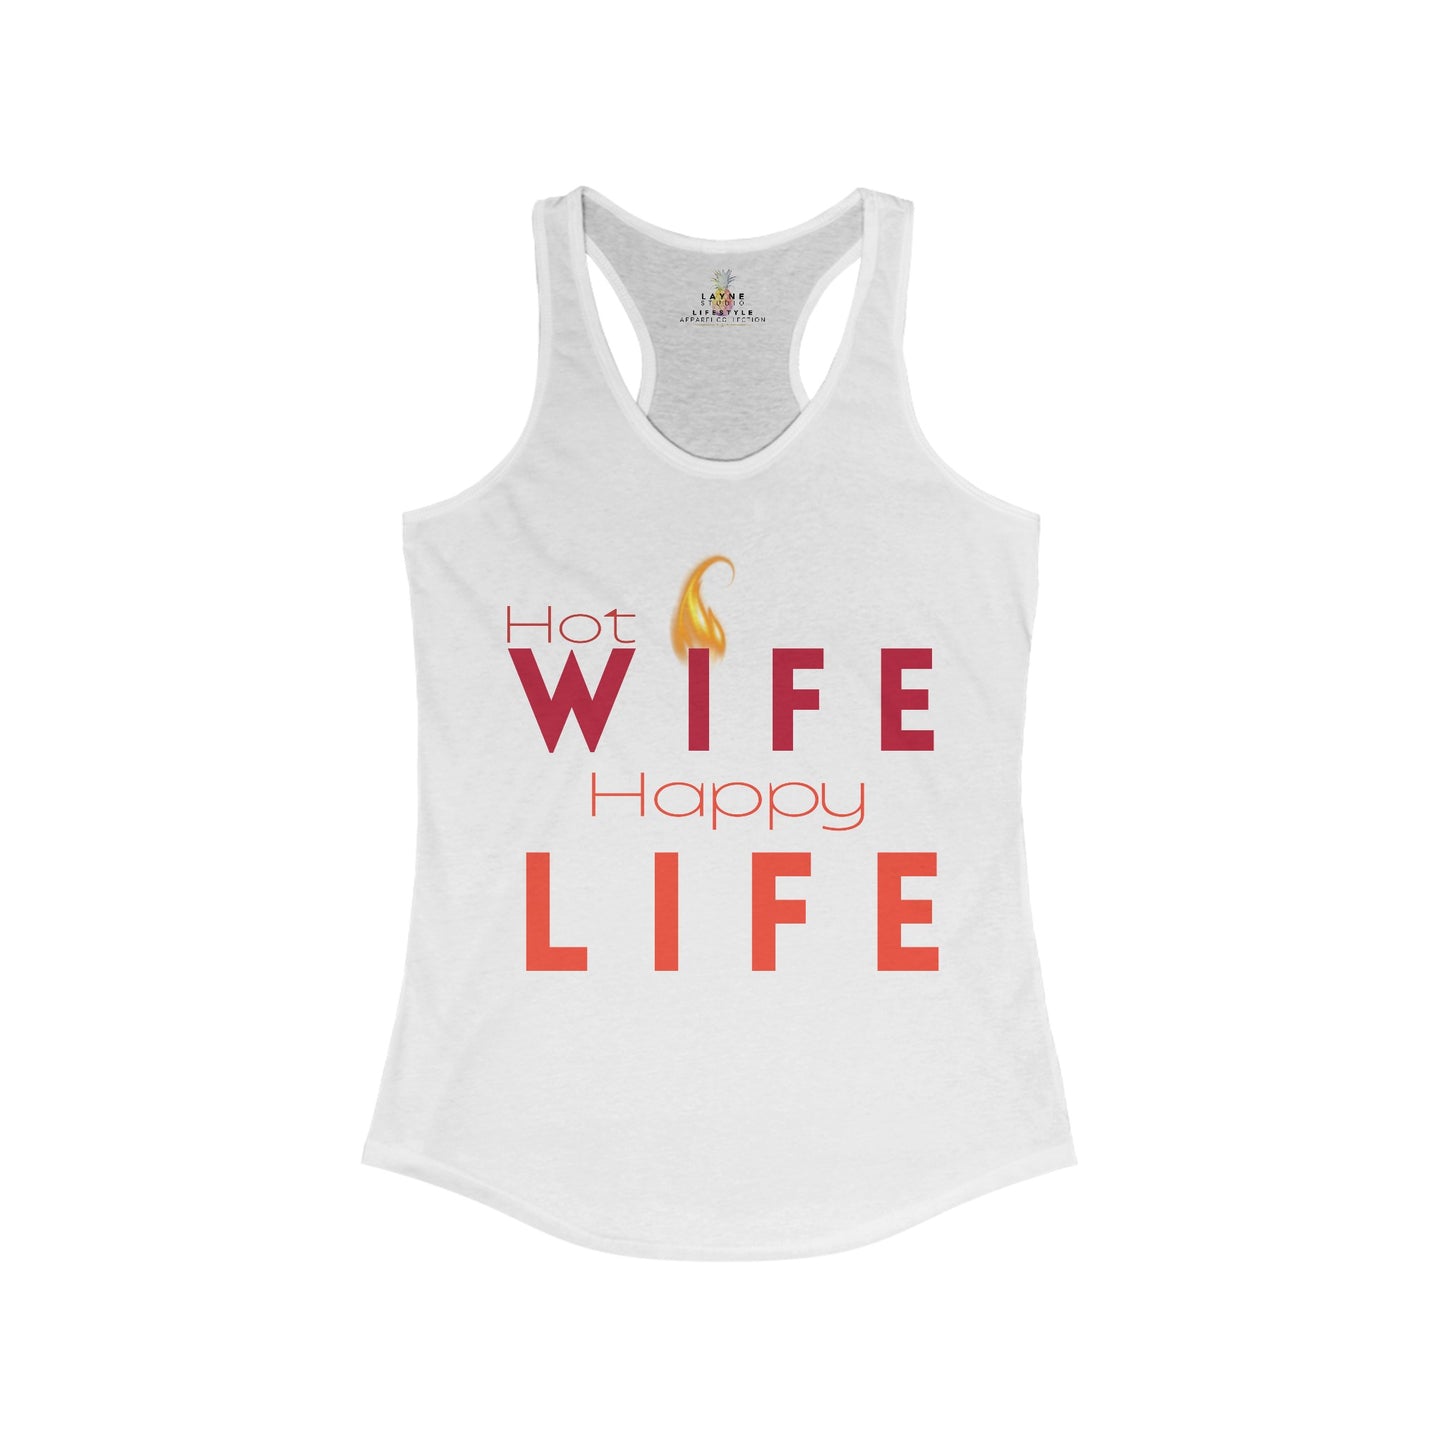 Front View of Layne Studios "Hot Wife Happy Life" Graphic Solid White Racerback Tank-Top